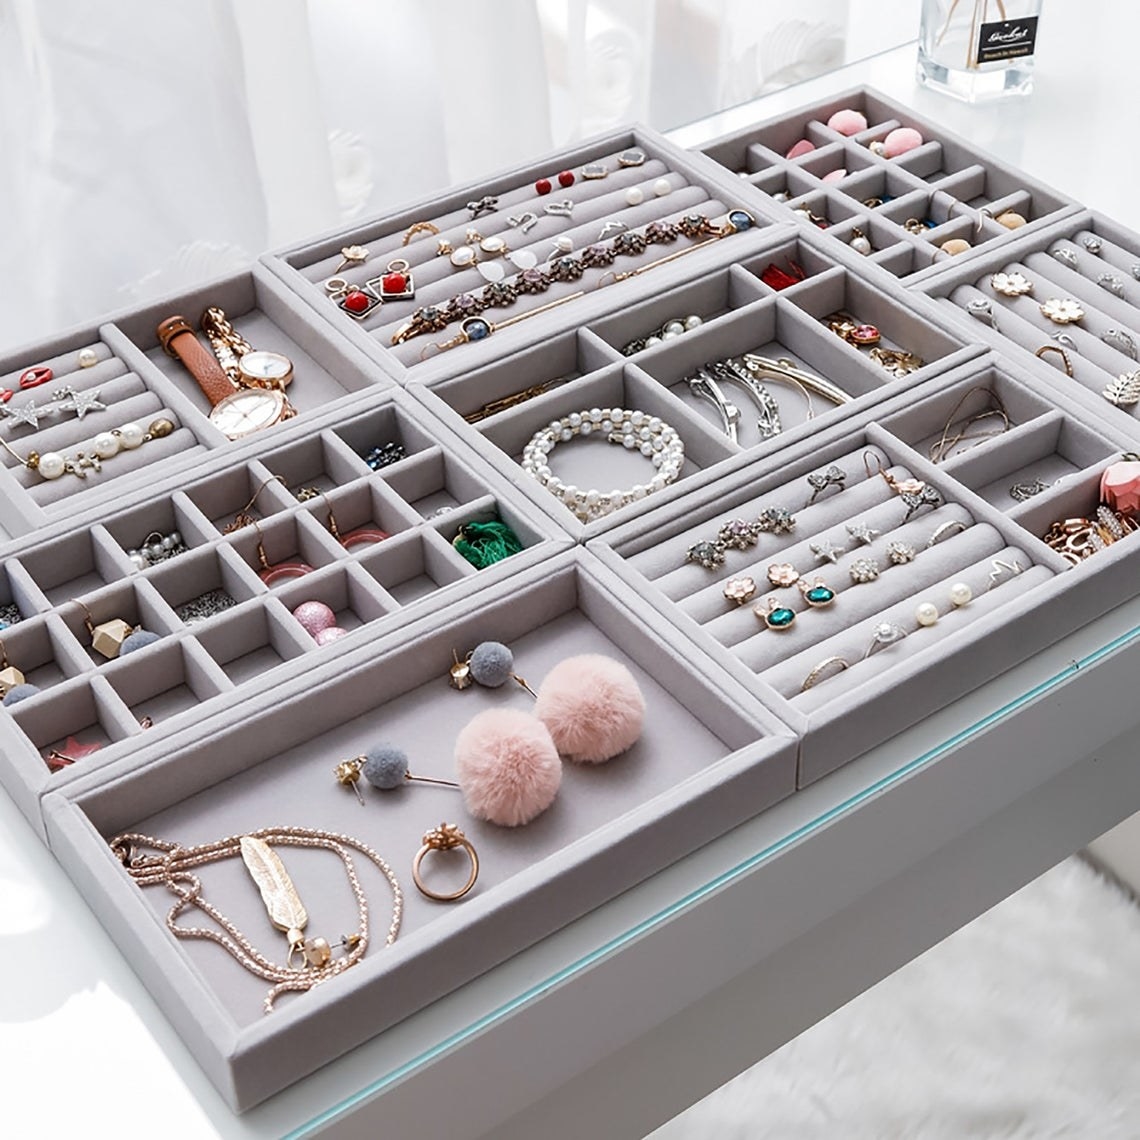 A variety of the jewelry trays filled with jewelry